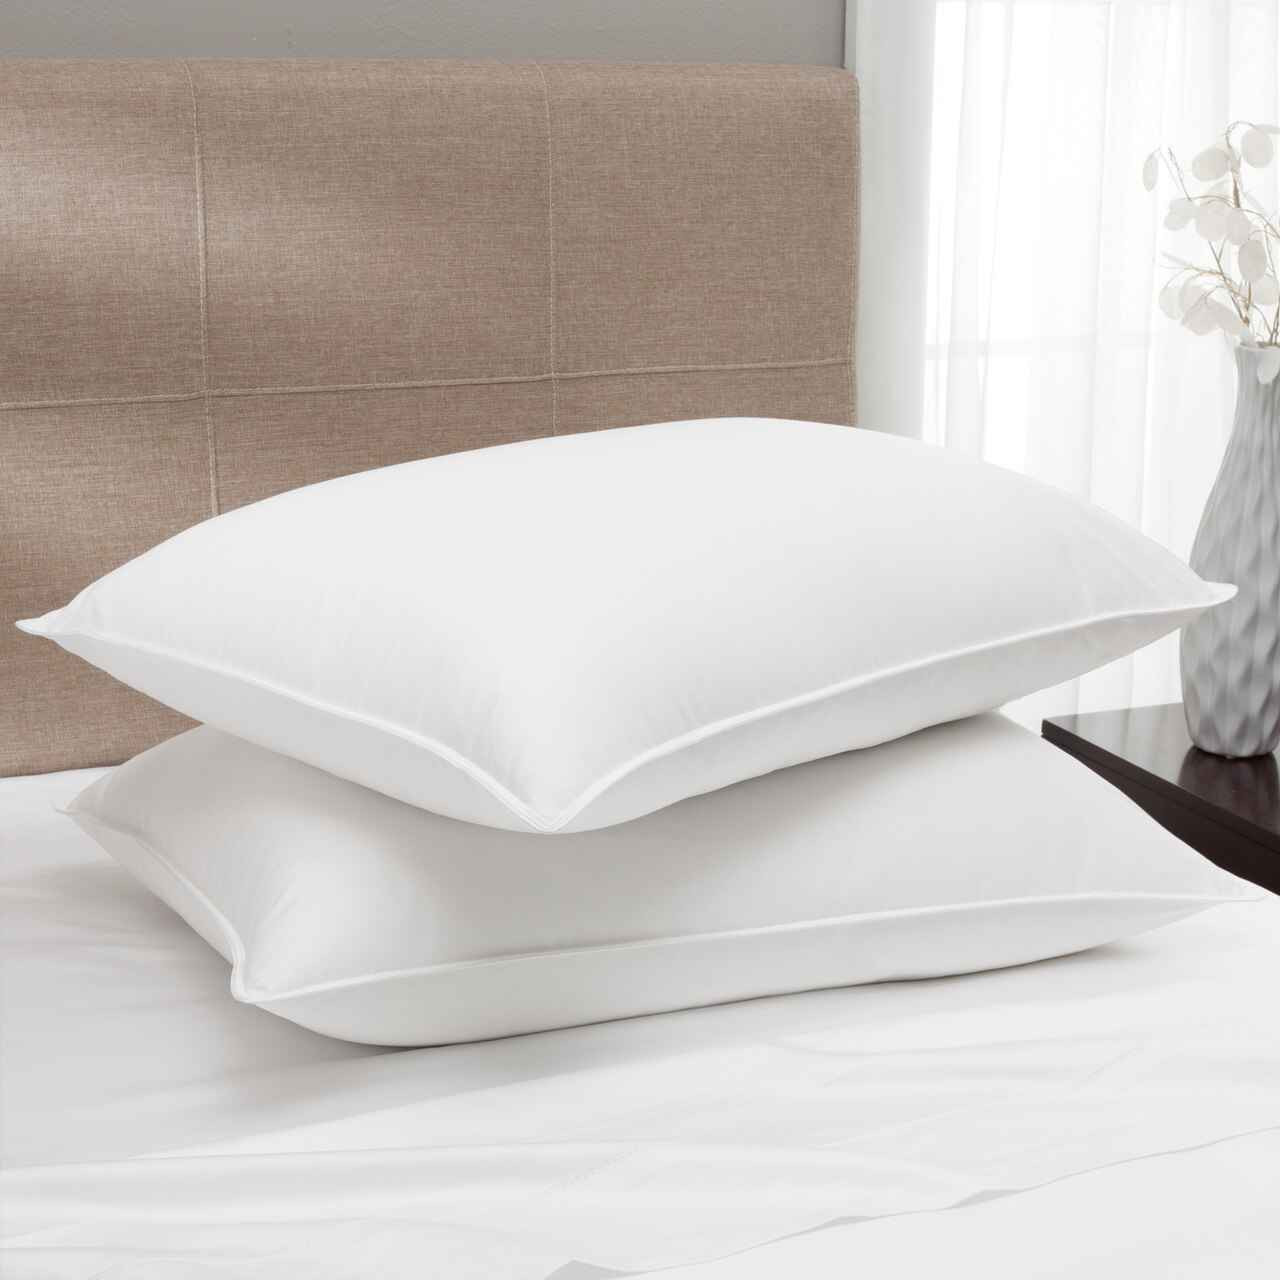 Down Dreams Classic Soft Pillow, Featured at Many Hotels 